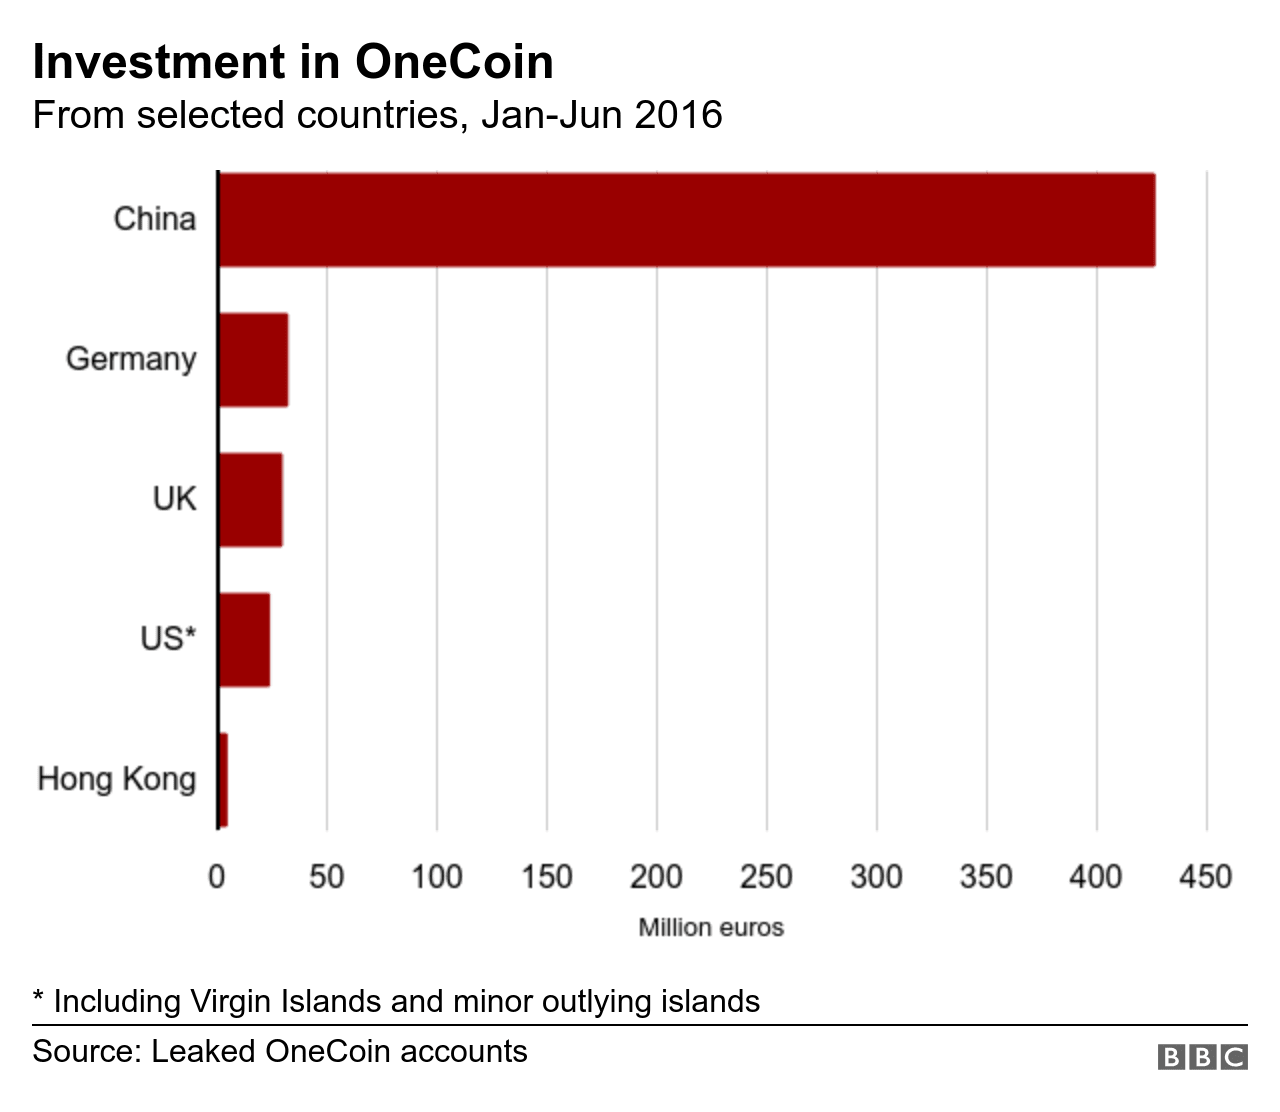 BBC chart featuring OneCoin investments from selected countries.